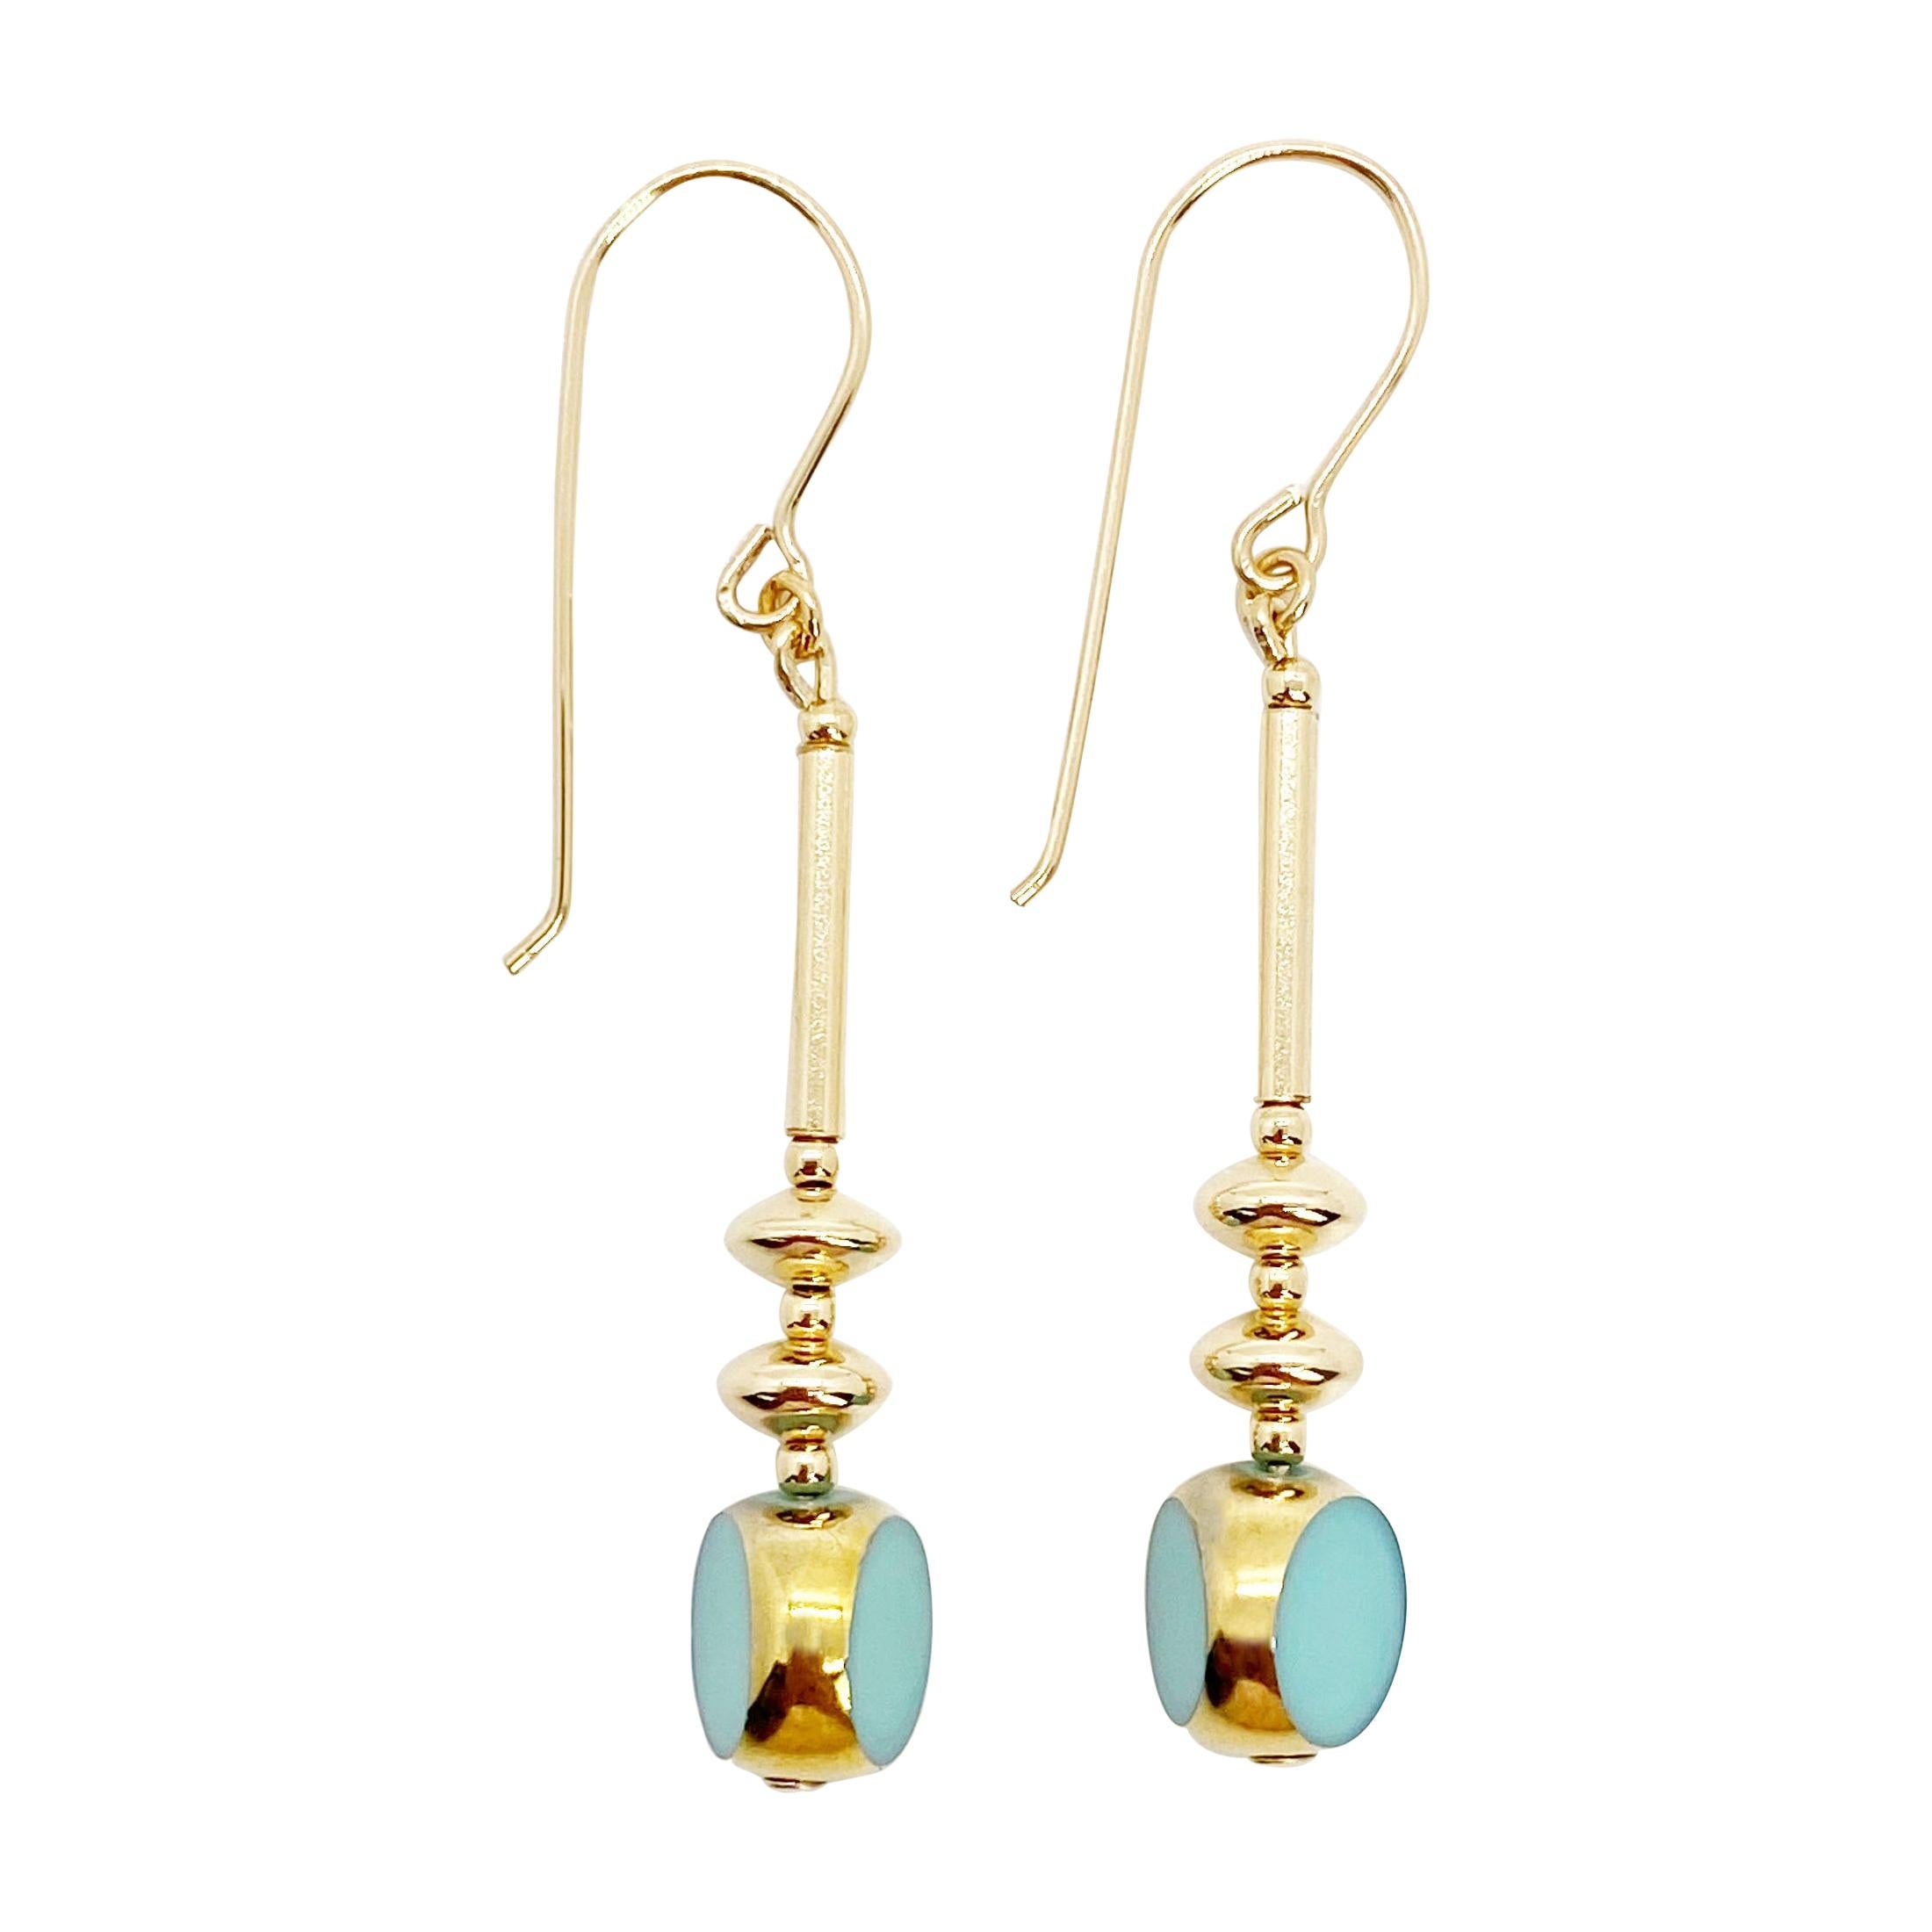 Gold plated and  sea glass beads earrings